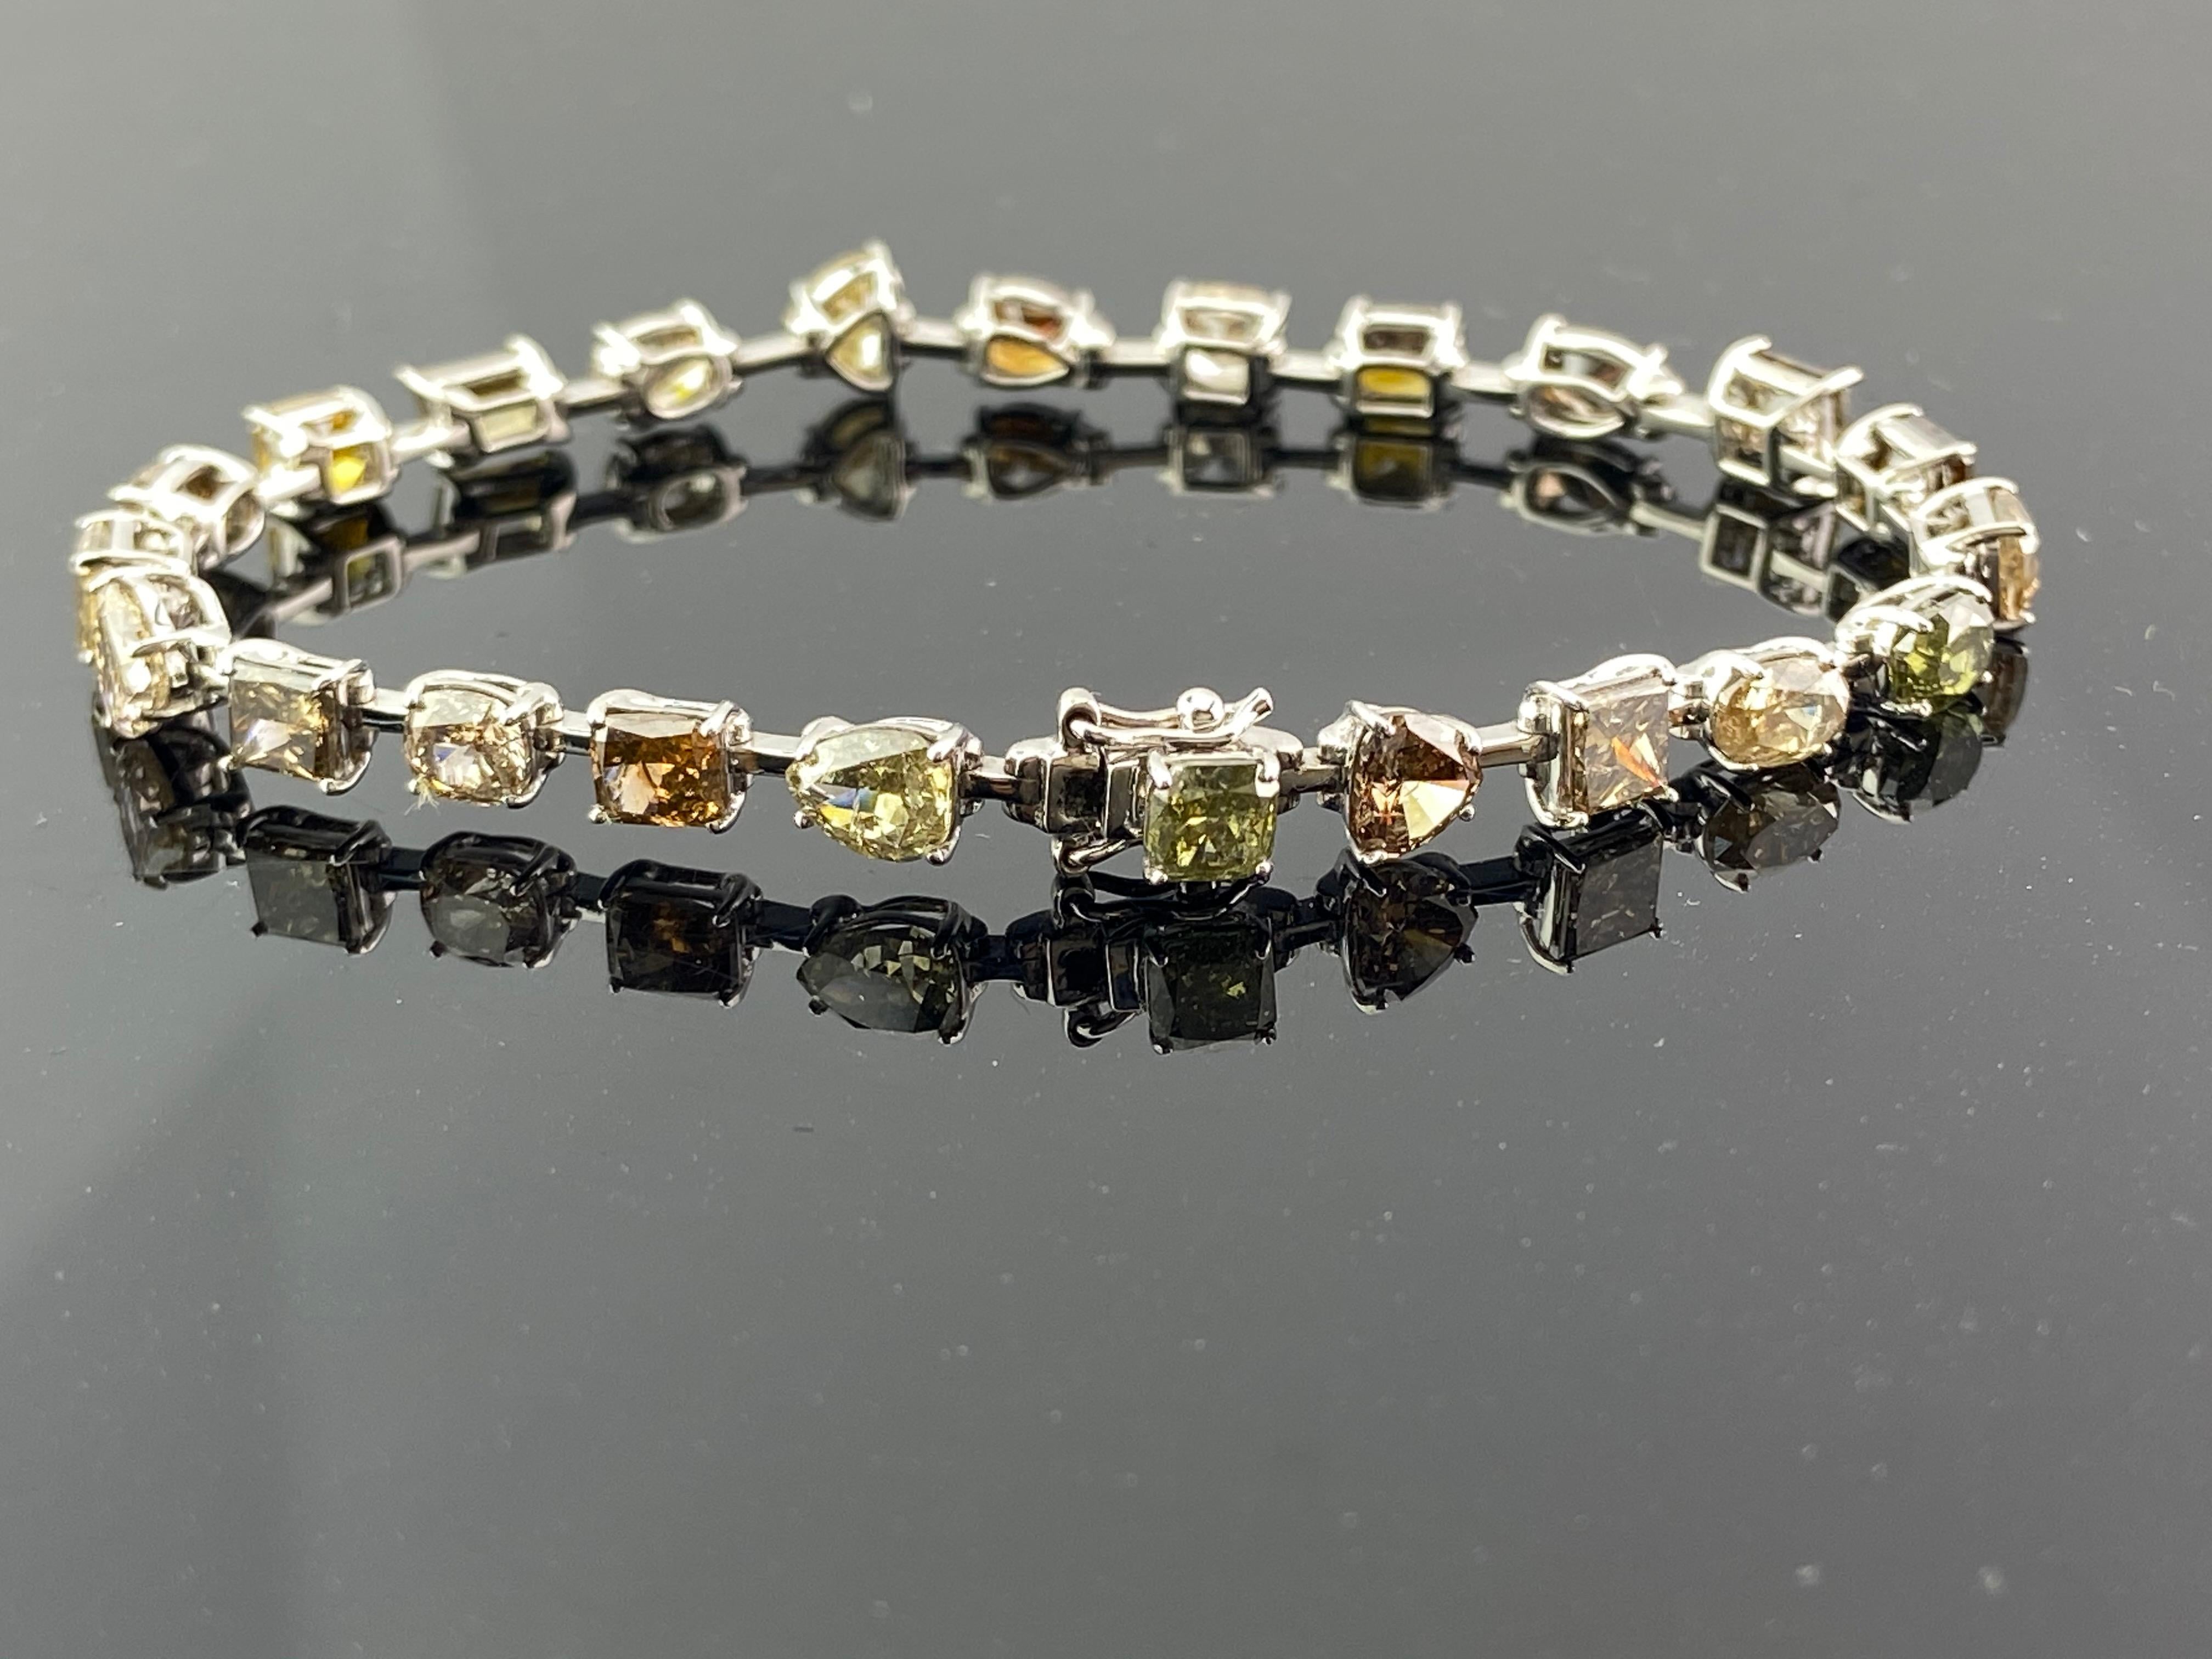 A unique, 12.40 carat Coloured Diamonds tennis bracelet, featuring 23 pieces of SI quality Diamonds, set in 10.52 grams of solid 18K White Gold. The bracelet is 7 inces long, and weighs around 13.5 grams in total.
Returns accepted within 7 days of